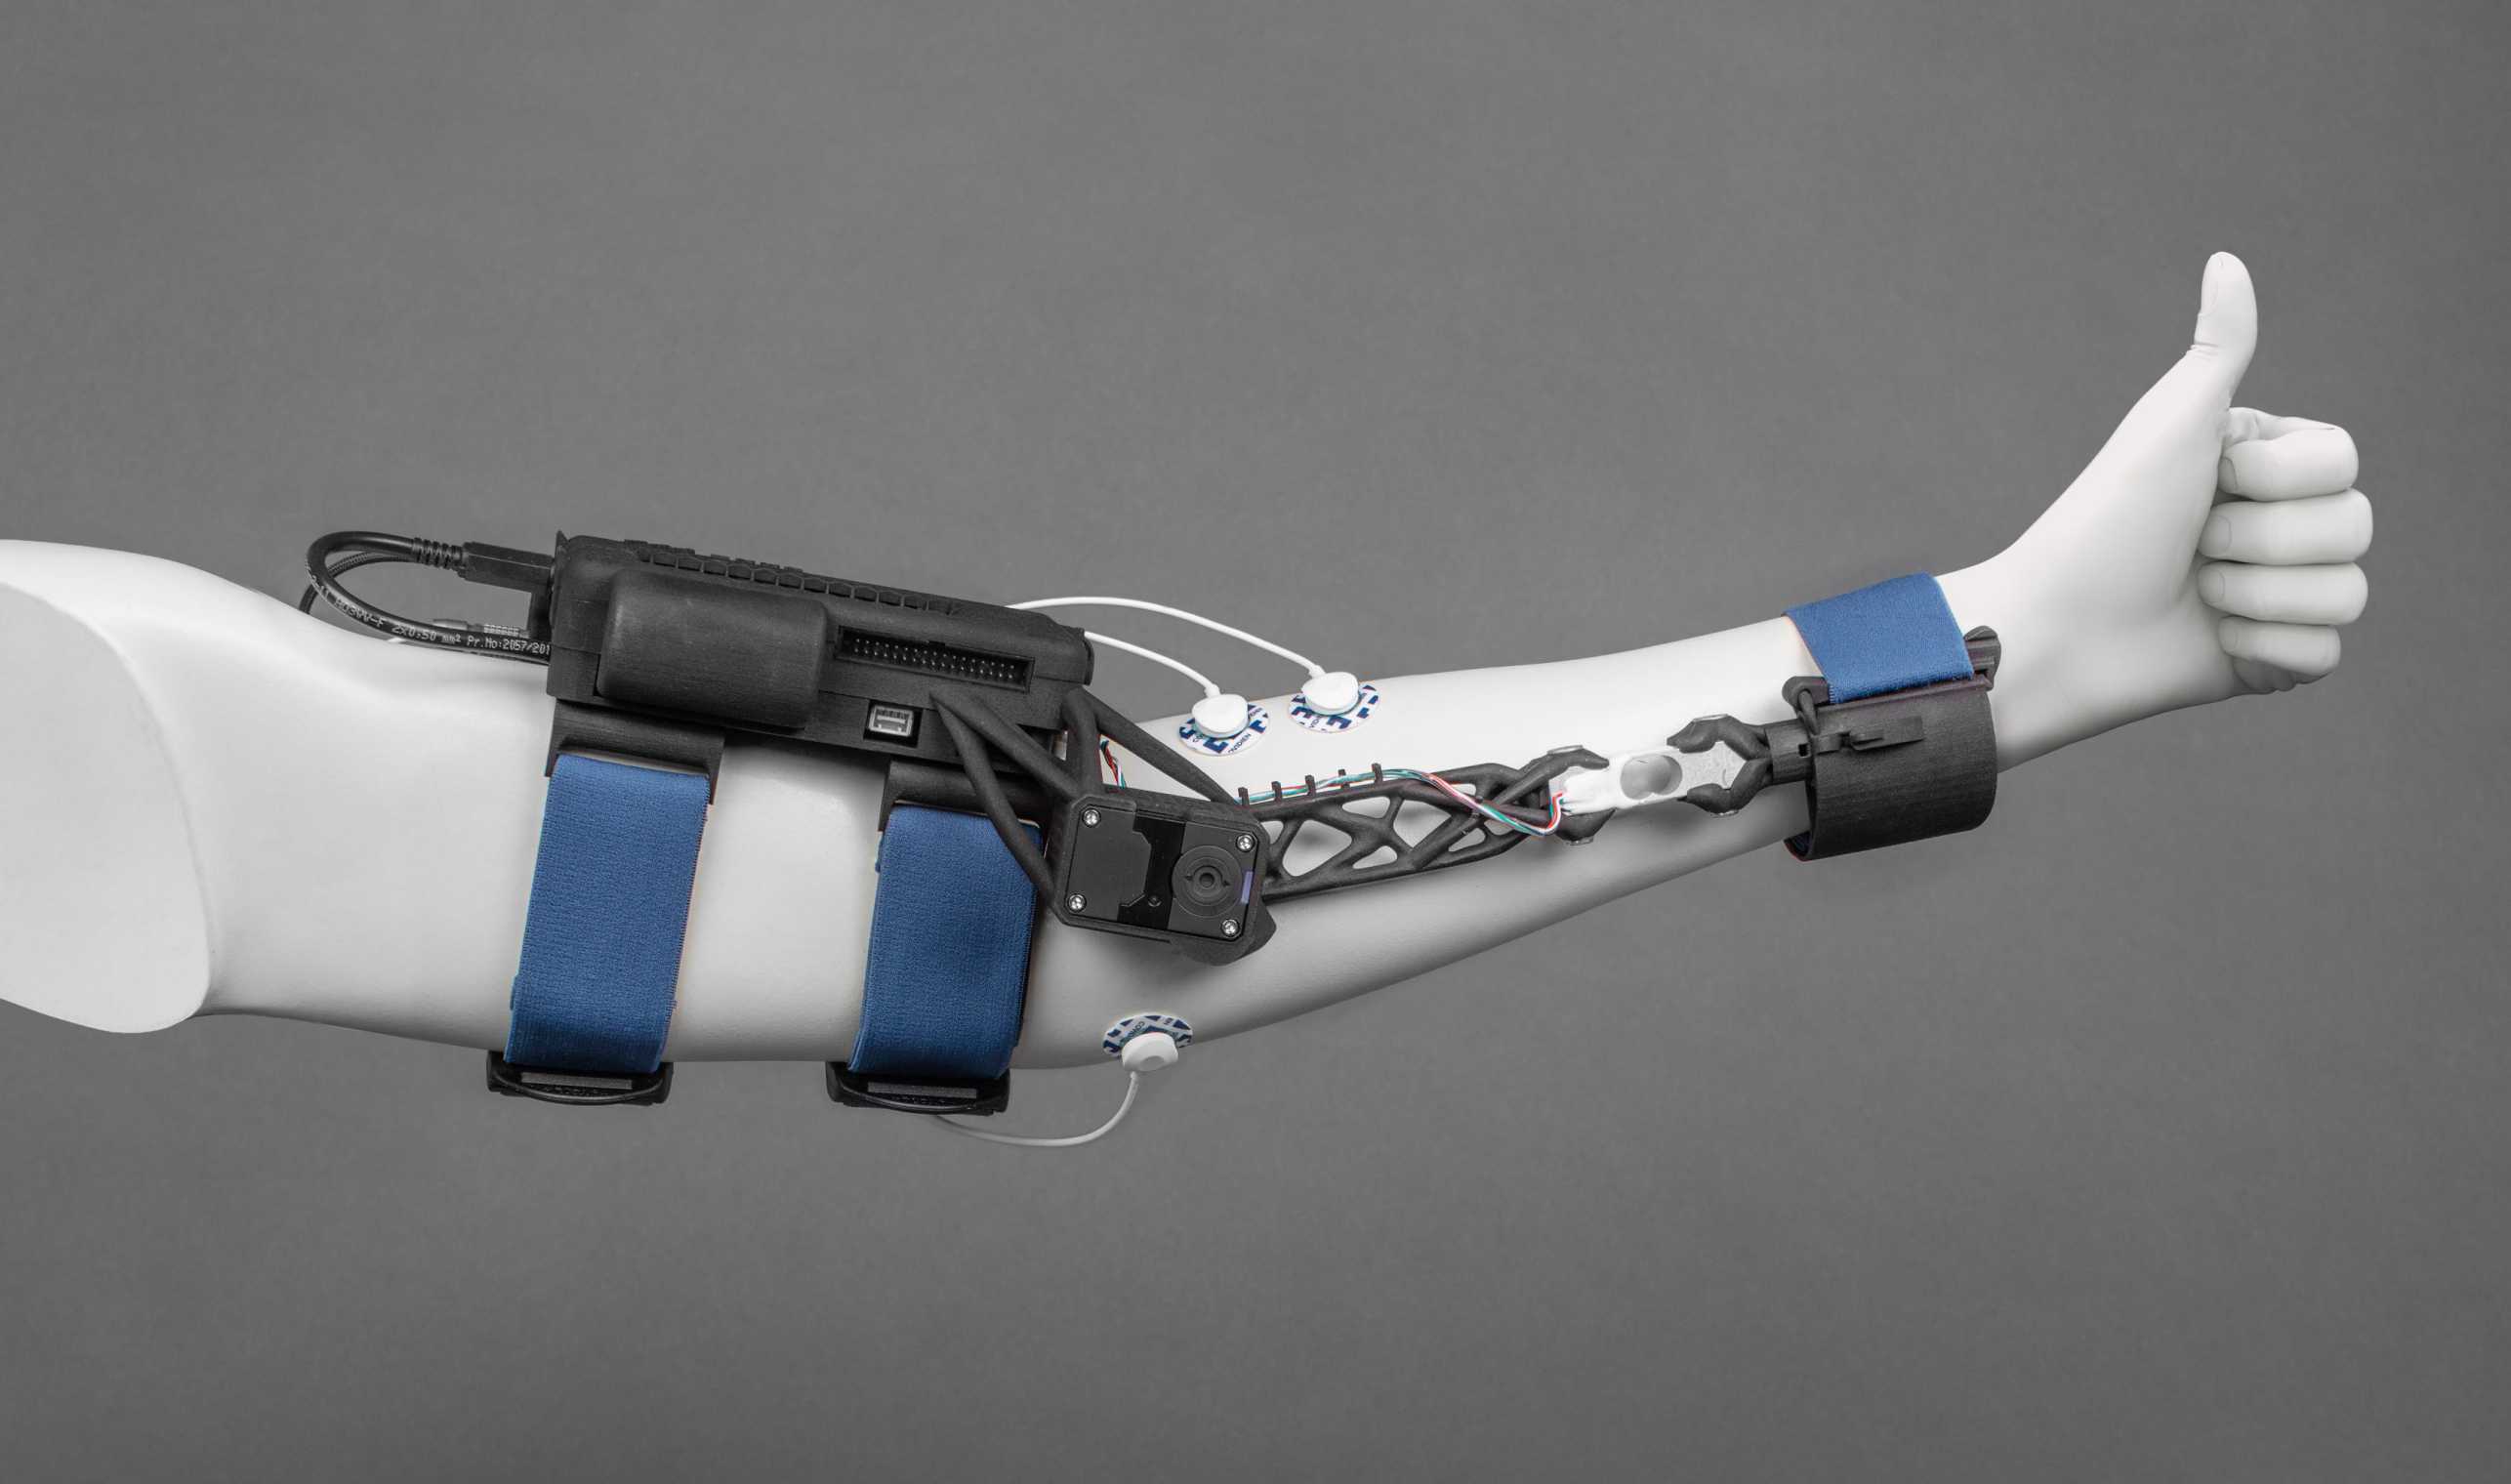 Enlarged view: Artificial arm with arm exoskeleton FLEXO. The hand shows the thumbs up symbol